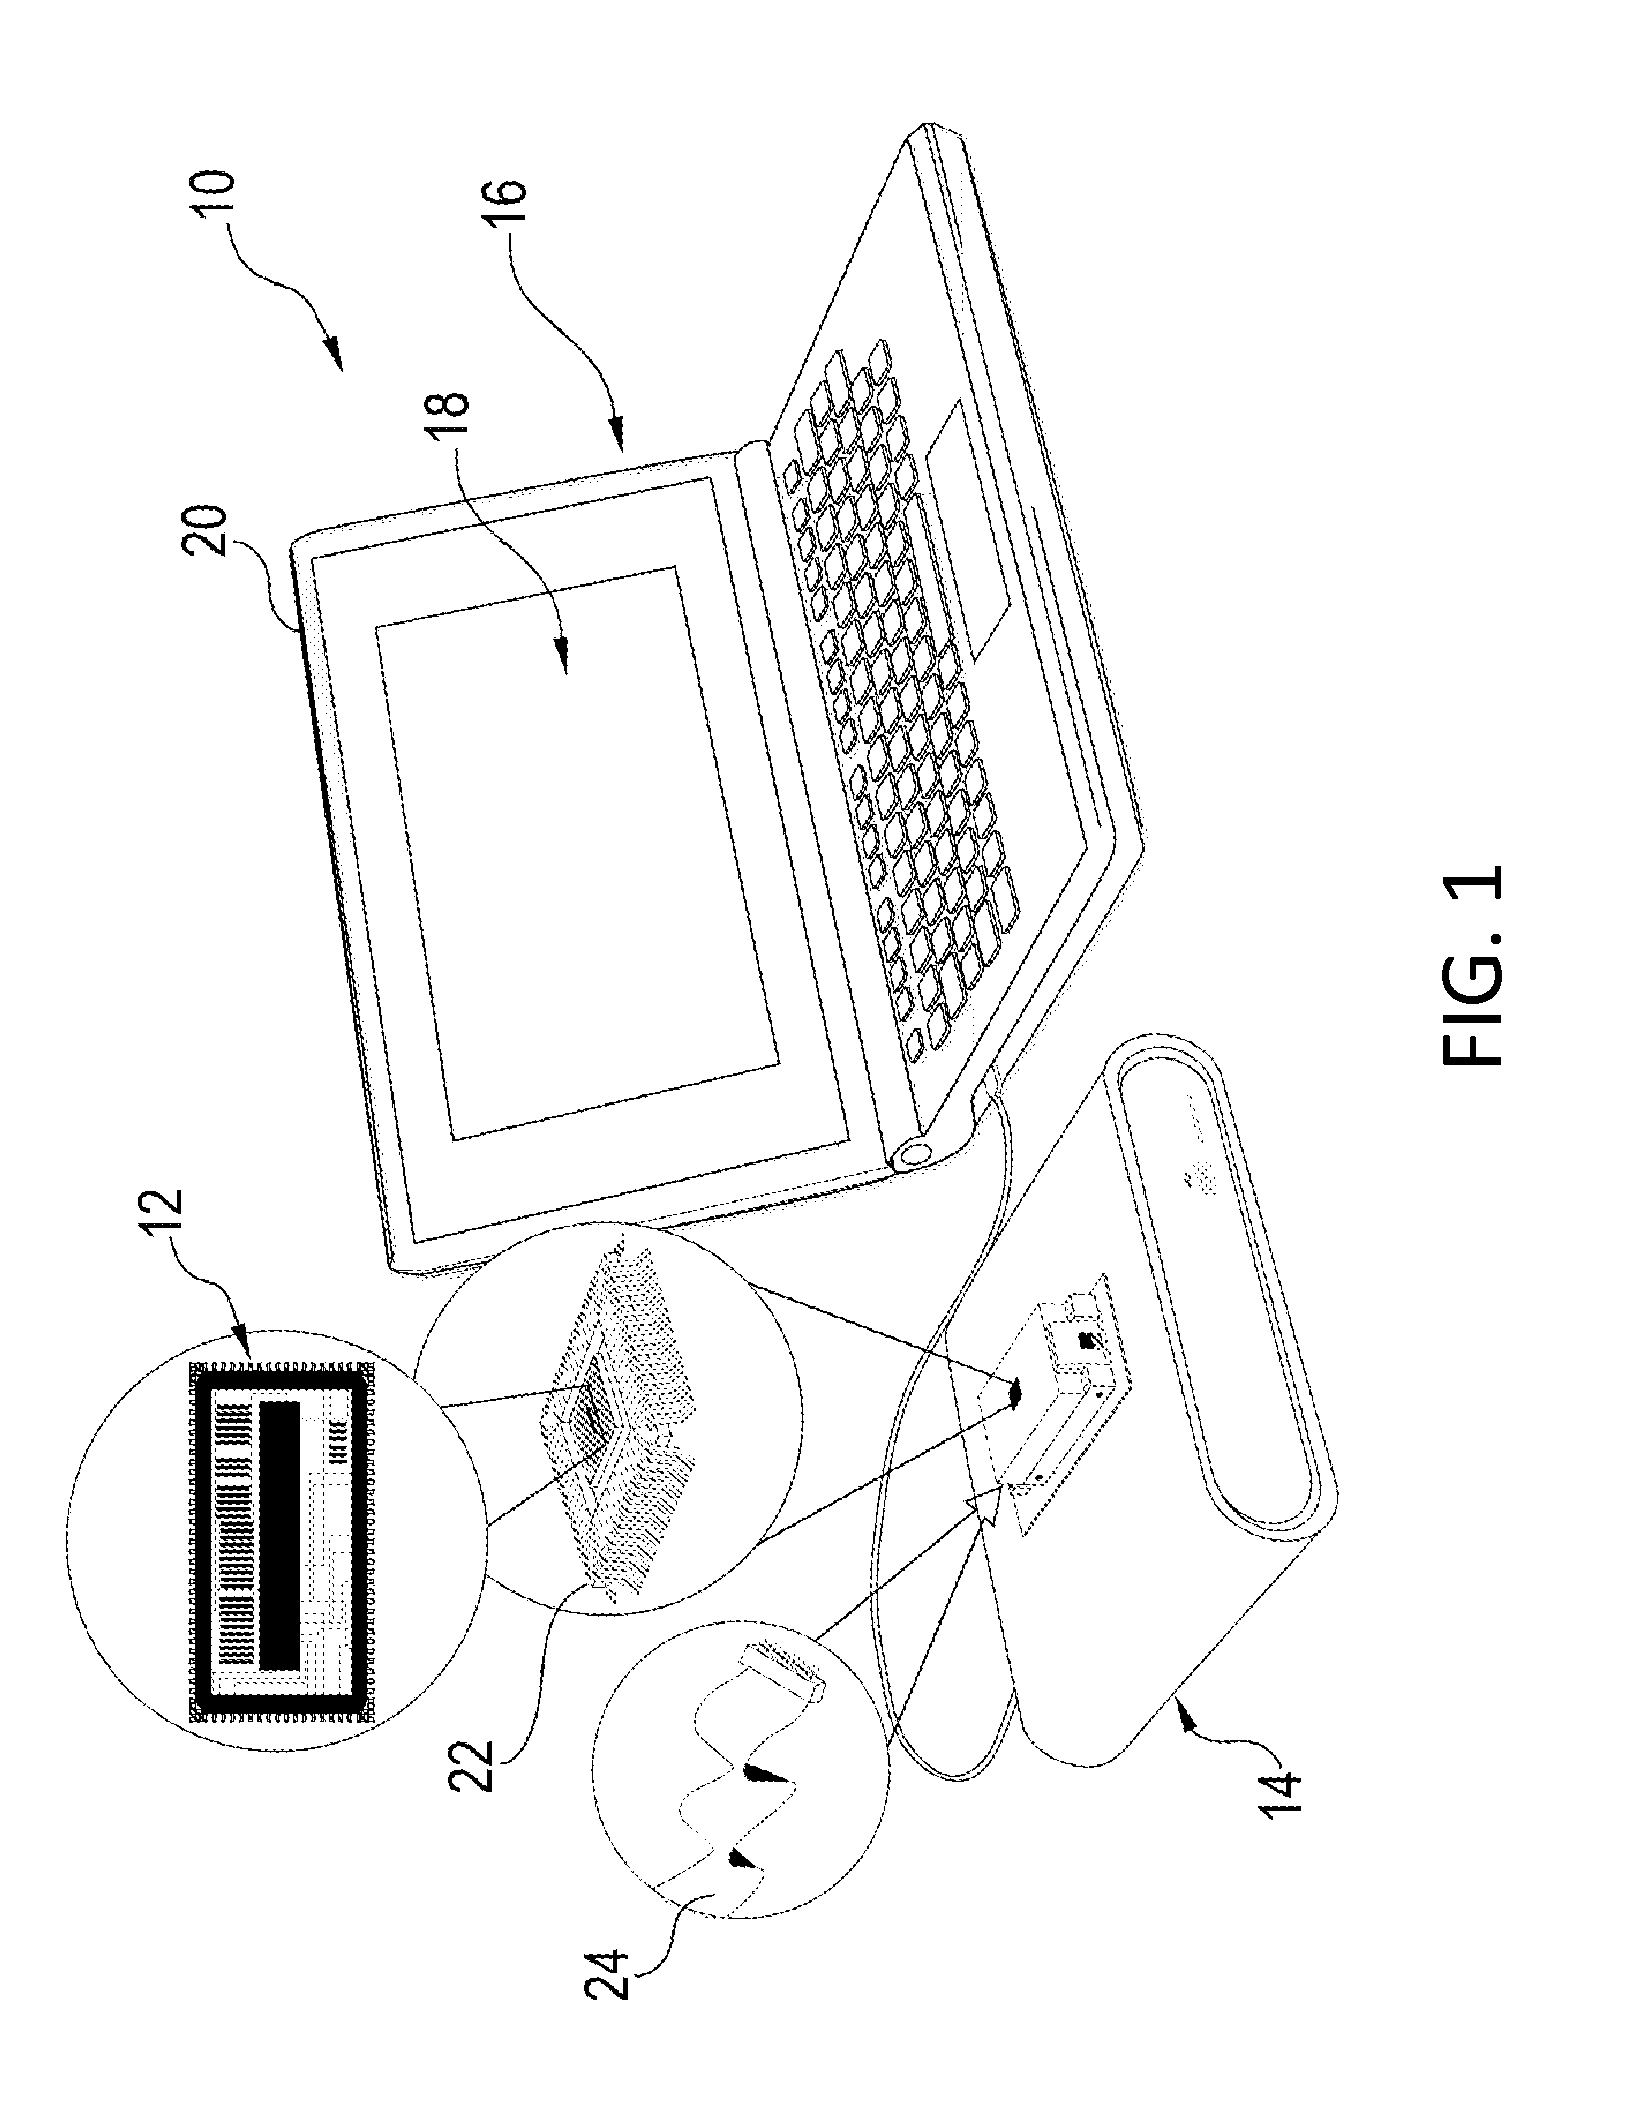 Programmable test chip, system and method for characterization of integrated circuit fabrication processes